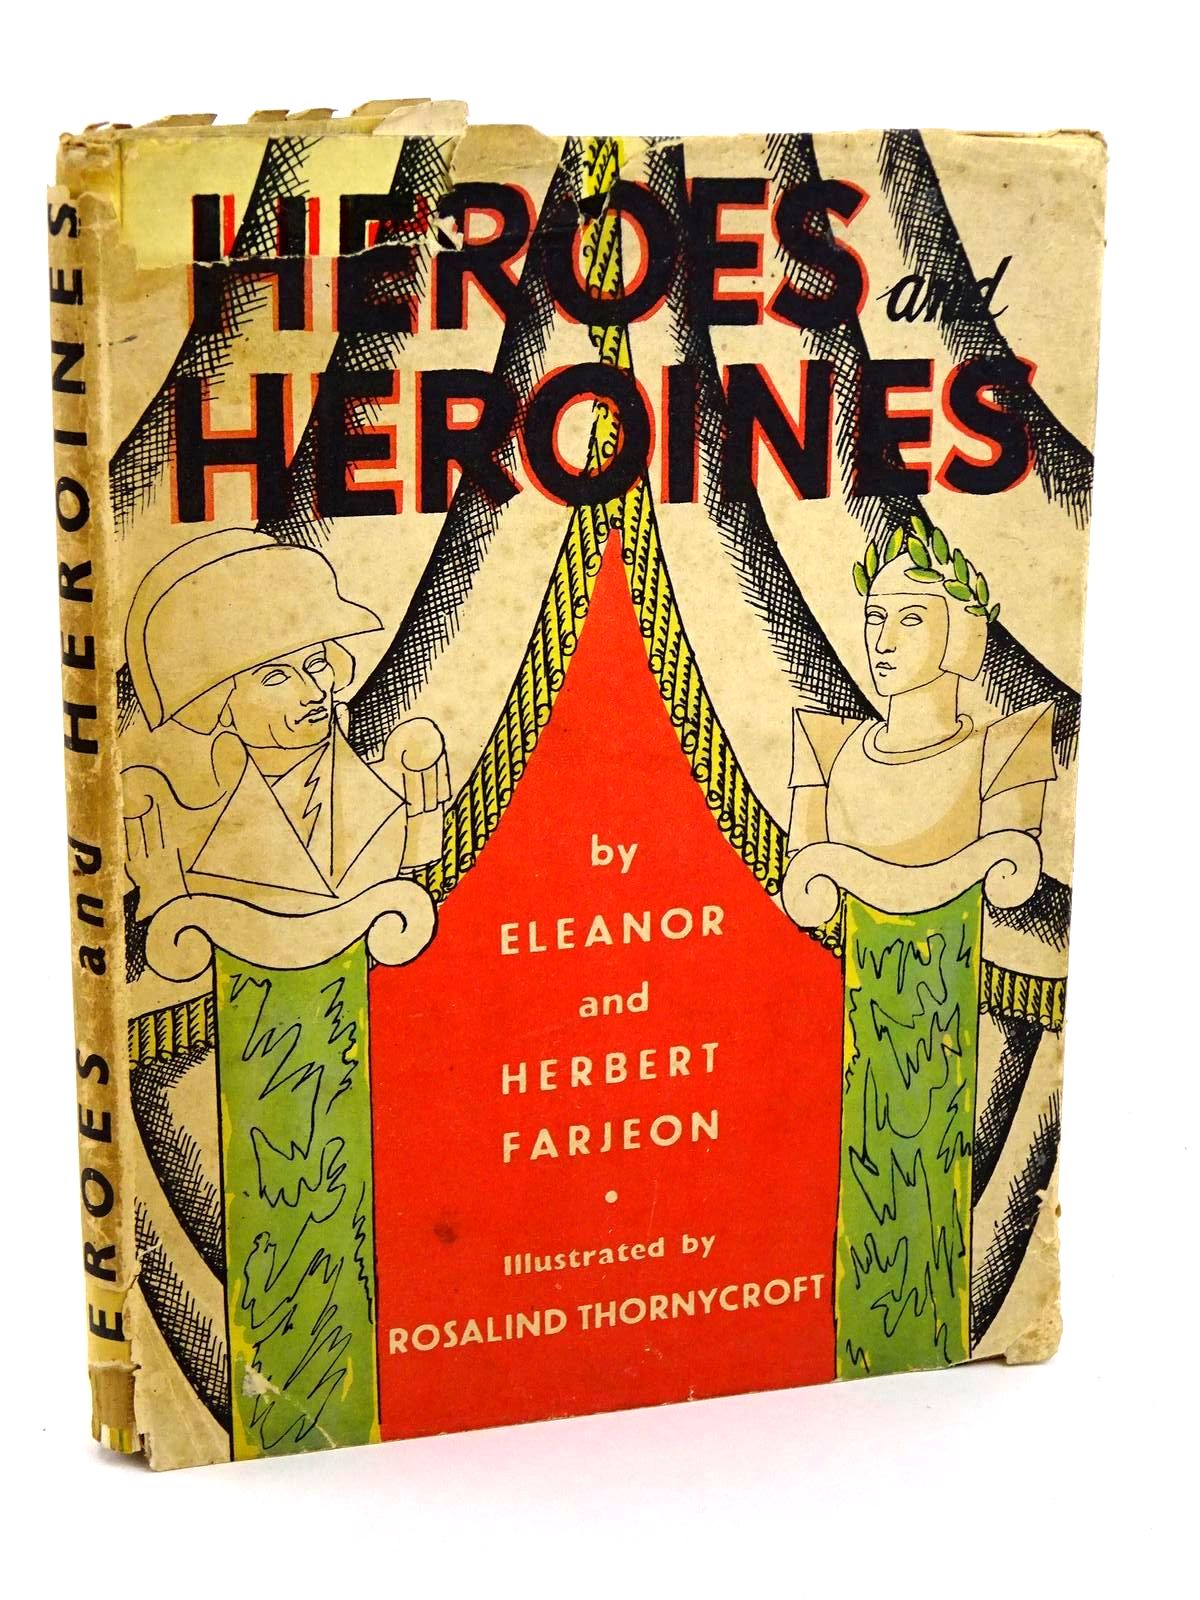 Photo of HEROES AND HEROINES written by Farjeon, Eleanor
Farjeon, Herbert illustrated by Thornycroft, Rosalind published by Victor Gollancz Ltd. (STOCK CODE: 1318294)  for sale by Stella & Rose's Books